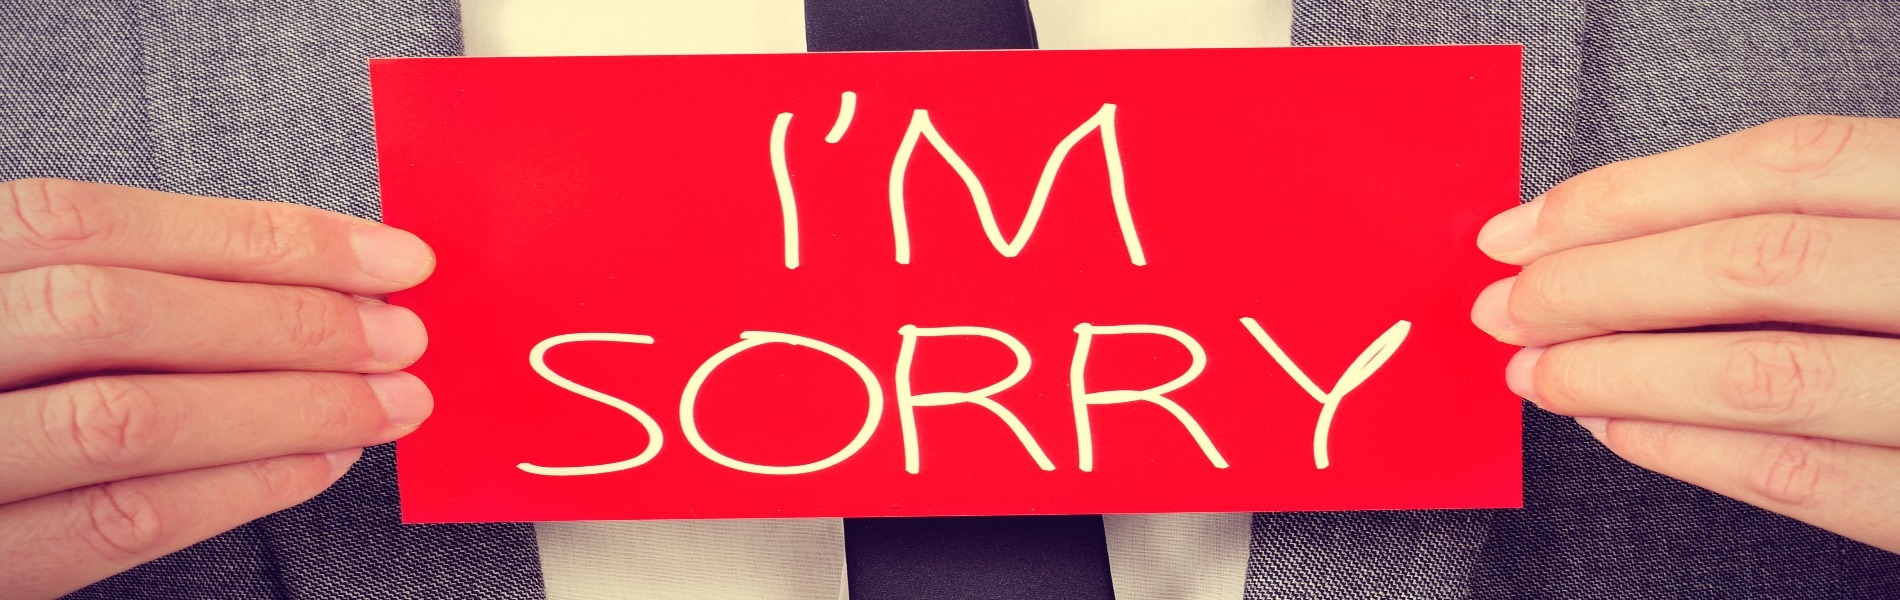 How to offer a business apology